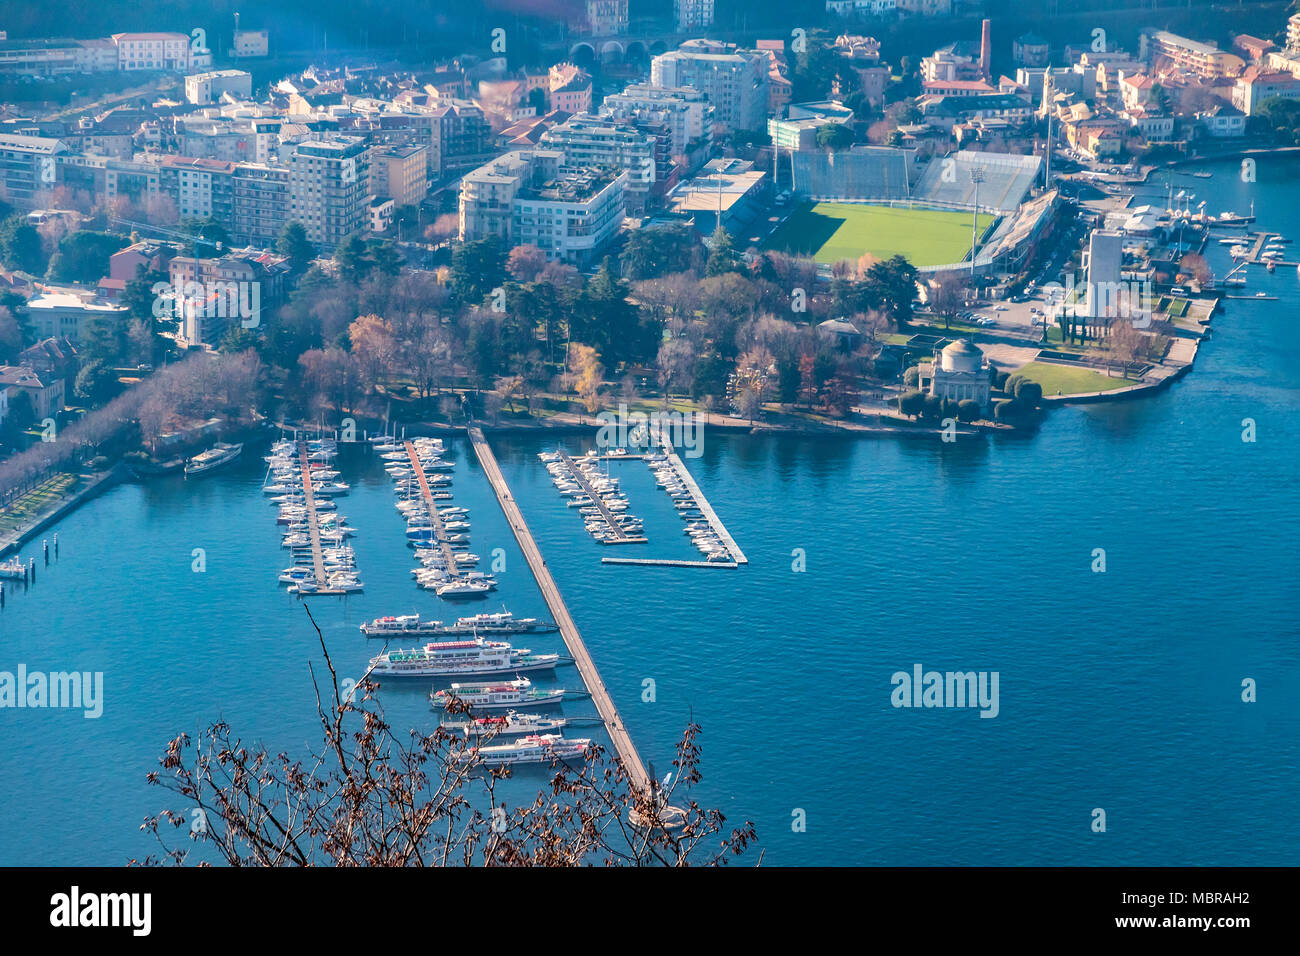 Aerial landscape of the picturesque colorful City of Como on Lake Como, Italy. Port of Como on a foreground. European vacation, living life style, tra Stock Photo